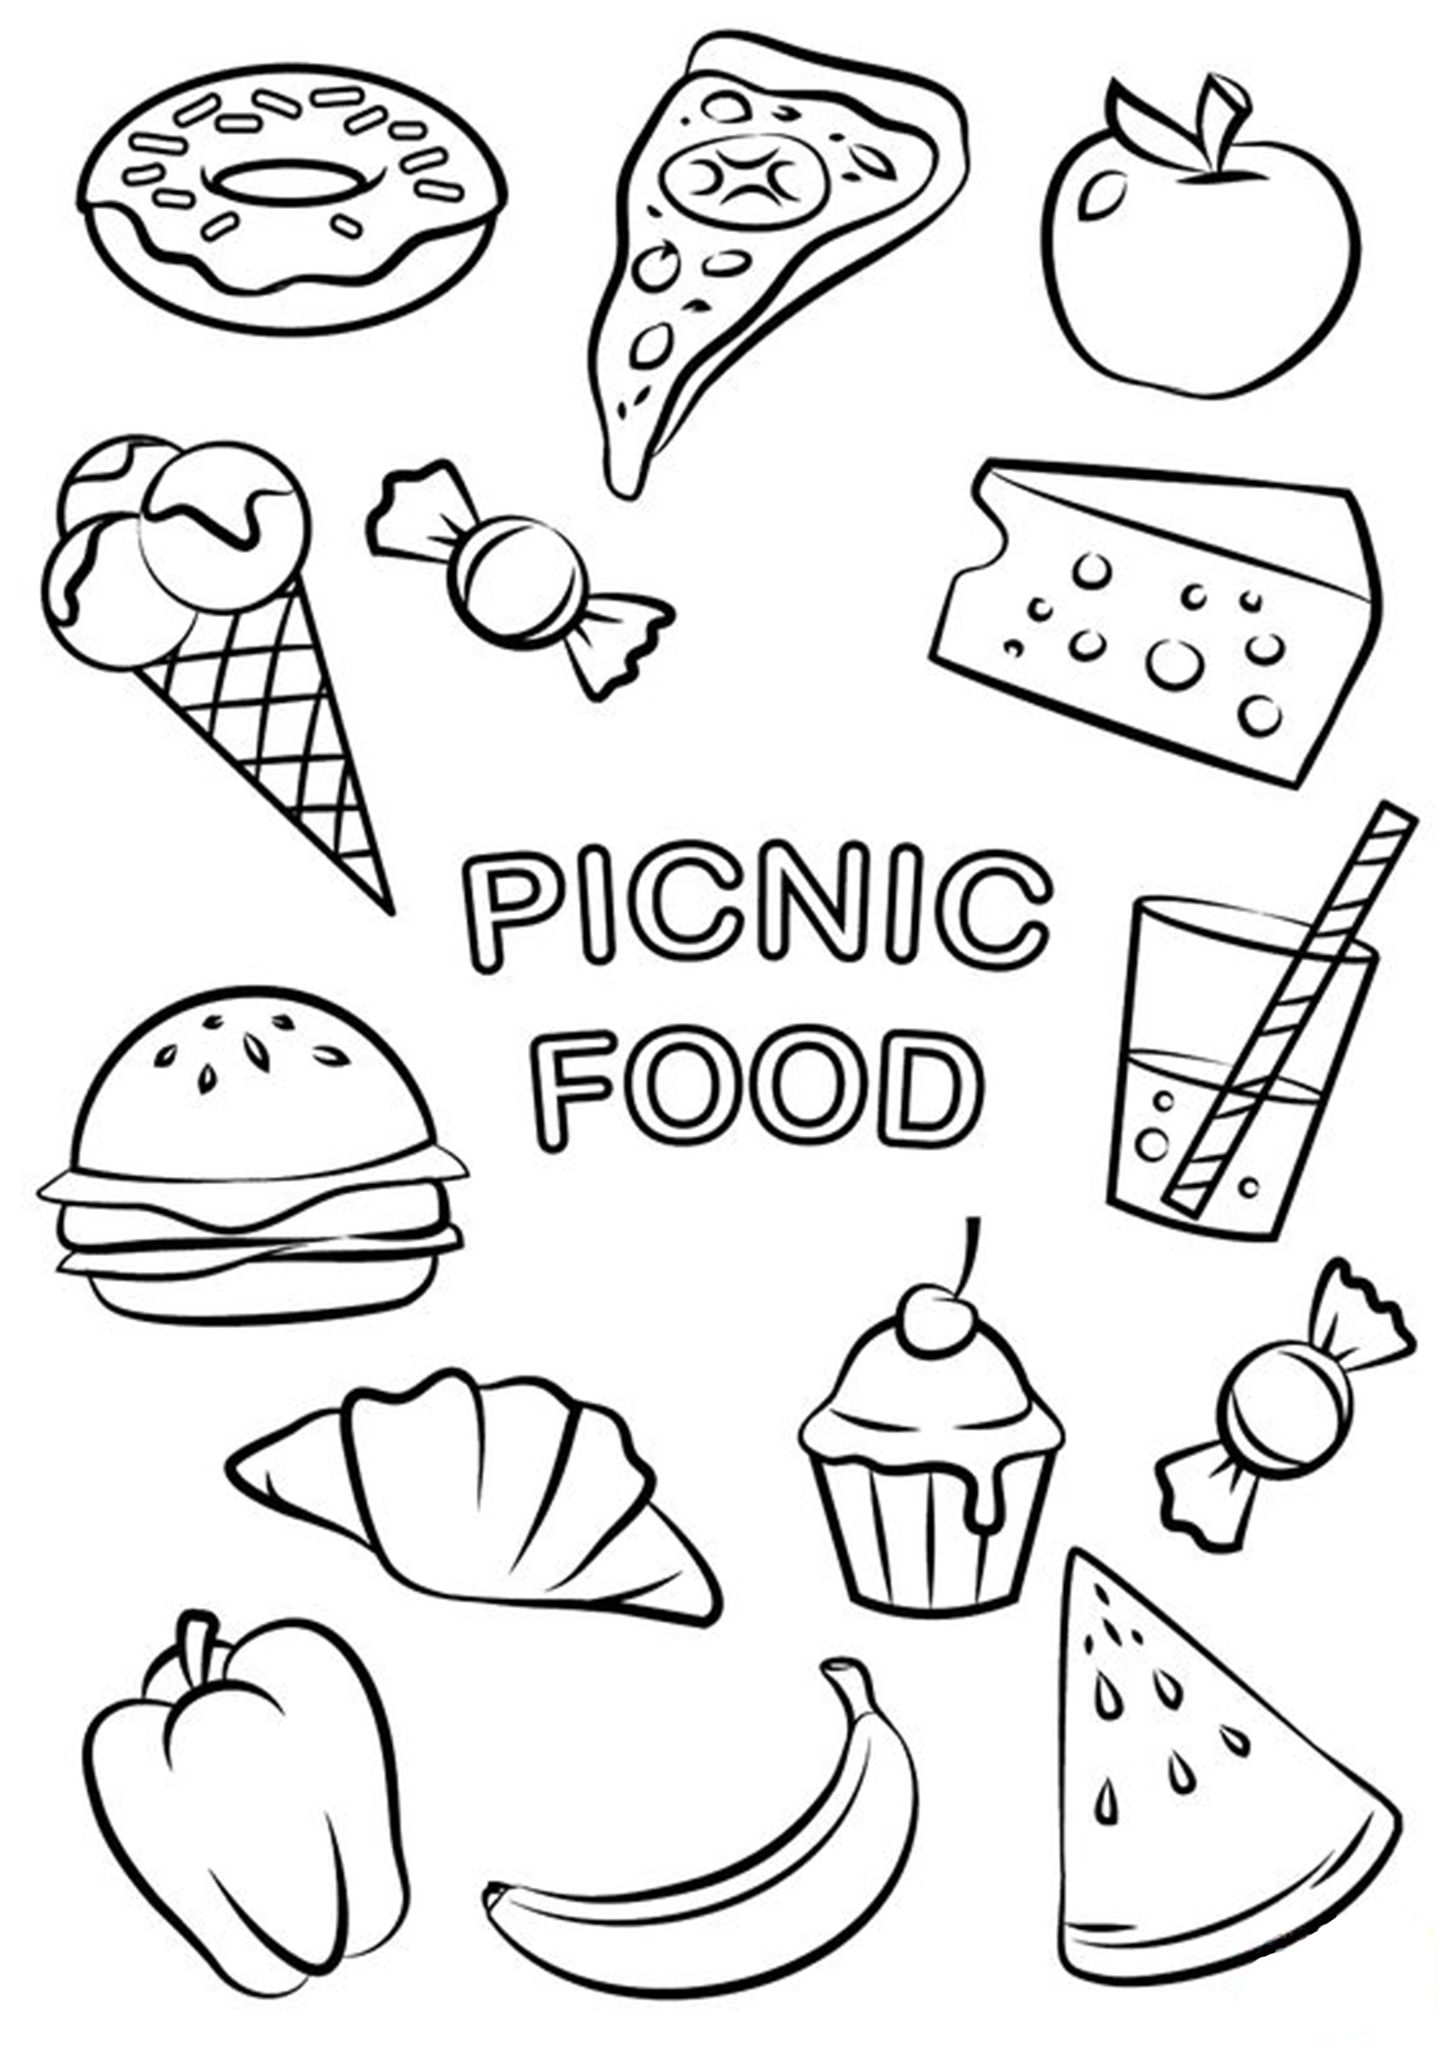 Free easy to print food coloring pages free printable coloring pages coloring pages for kids coloring pages